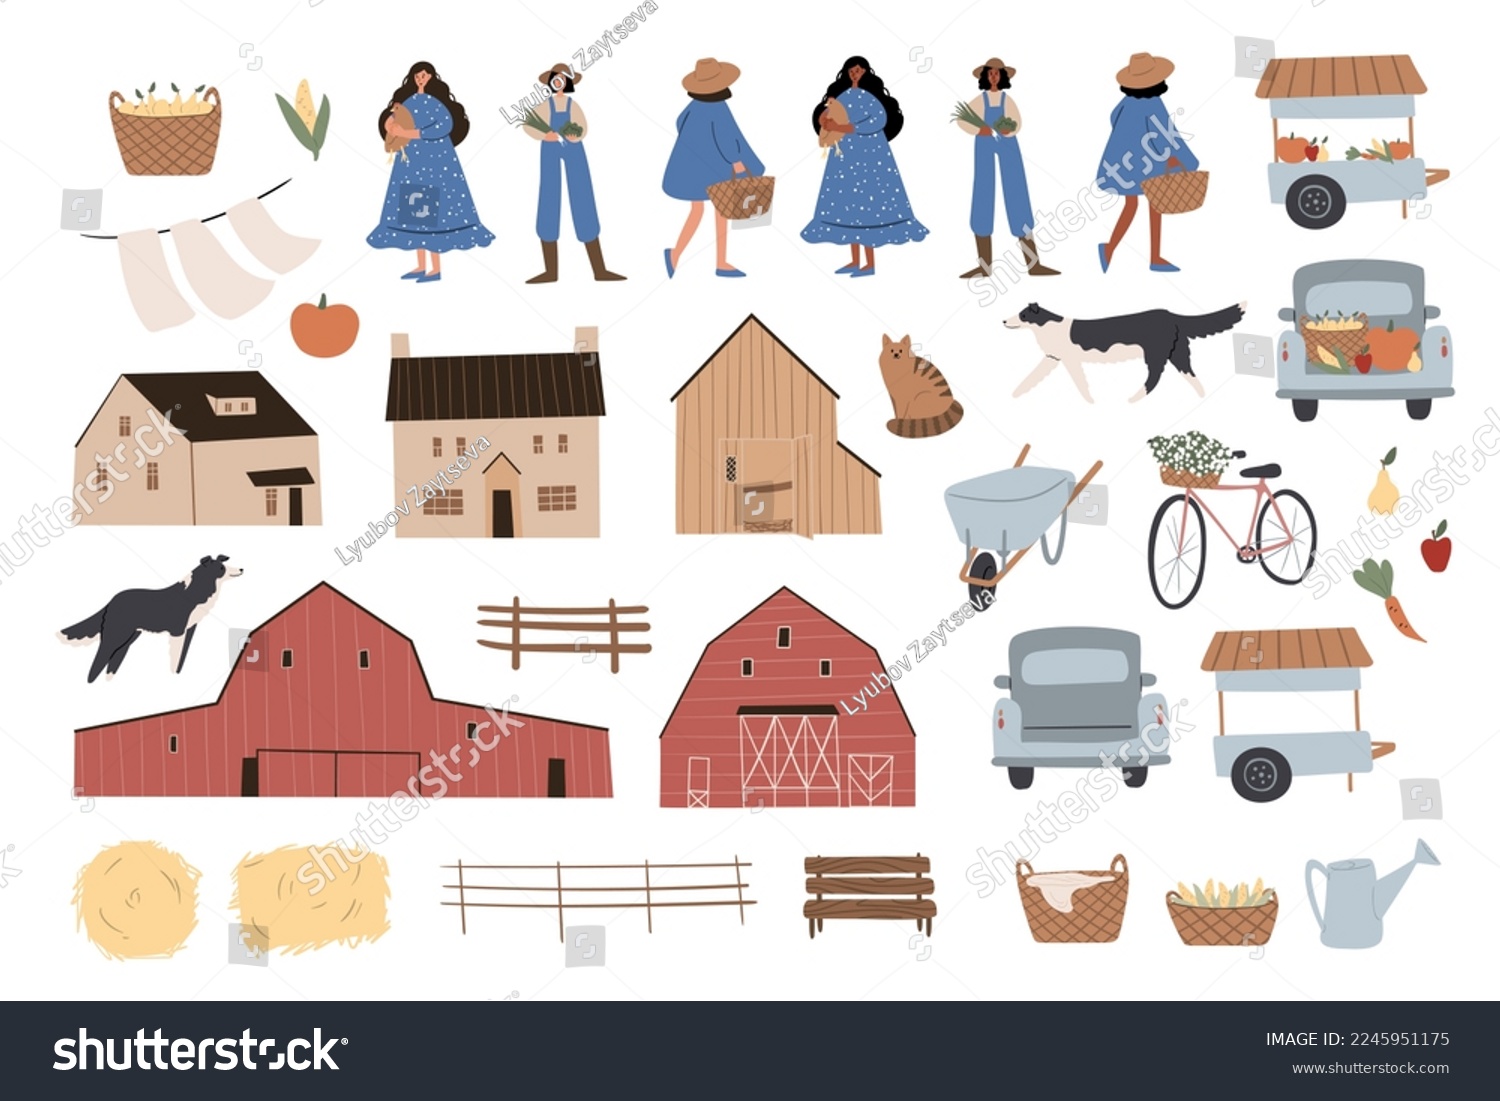 SVG of farm animals clipart, farm life svg png ai illustrations, farmhouse background png, cartoon characters flat vector style, svg